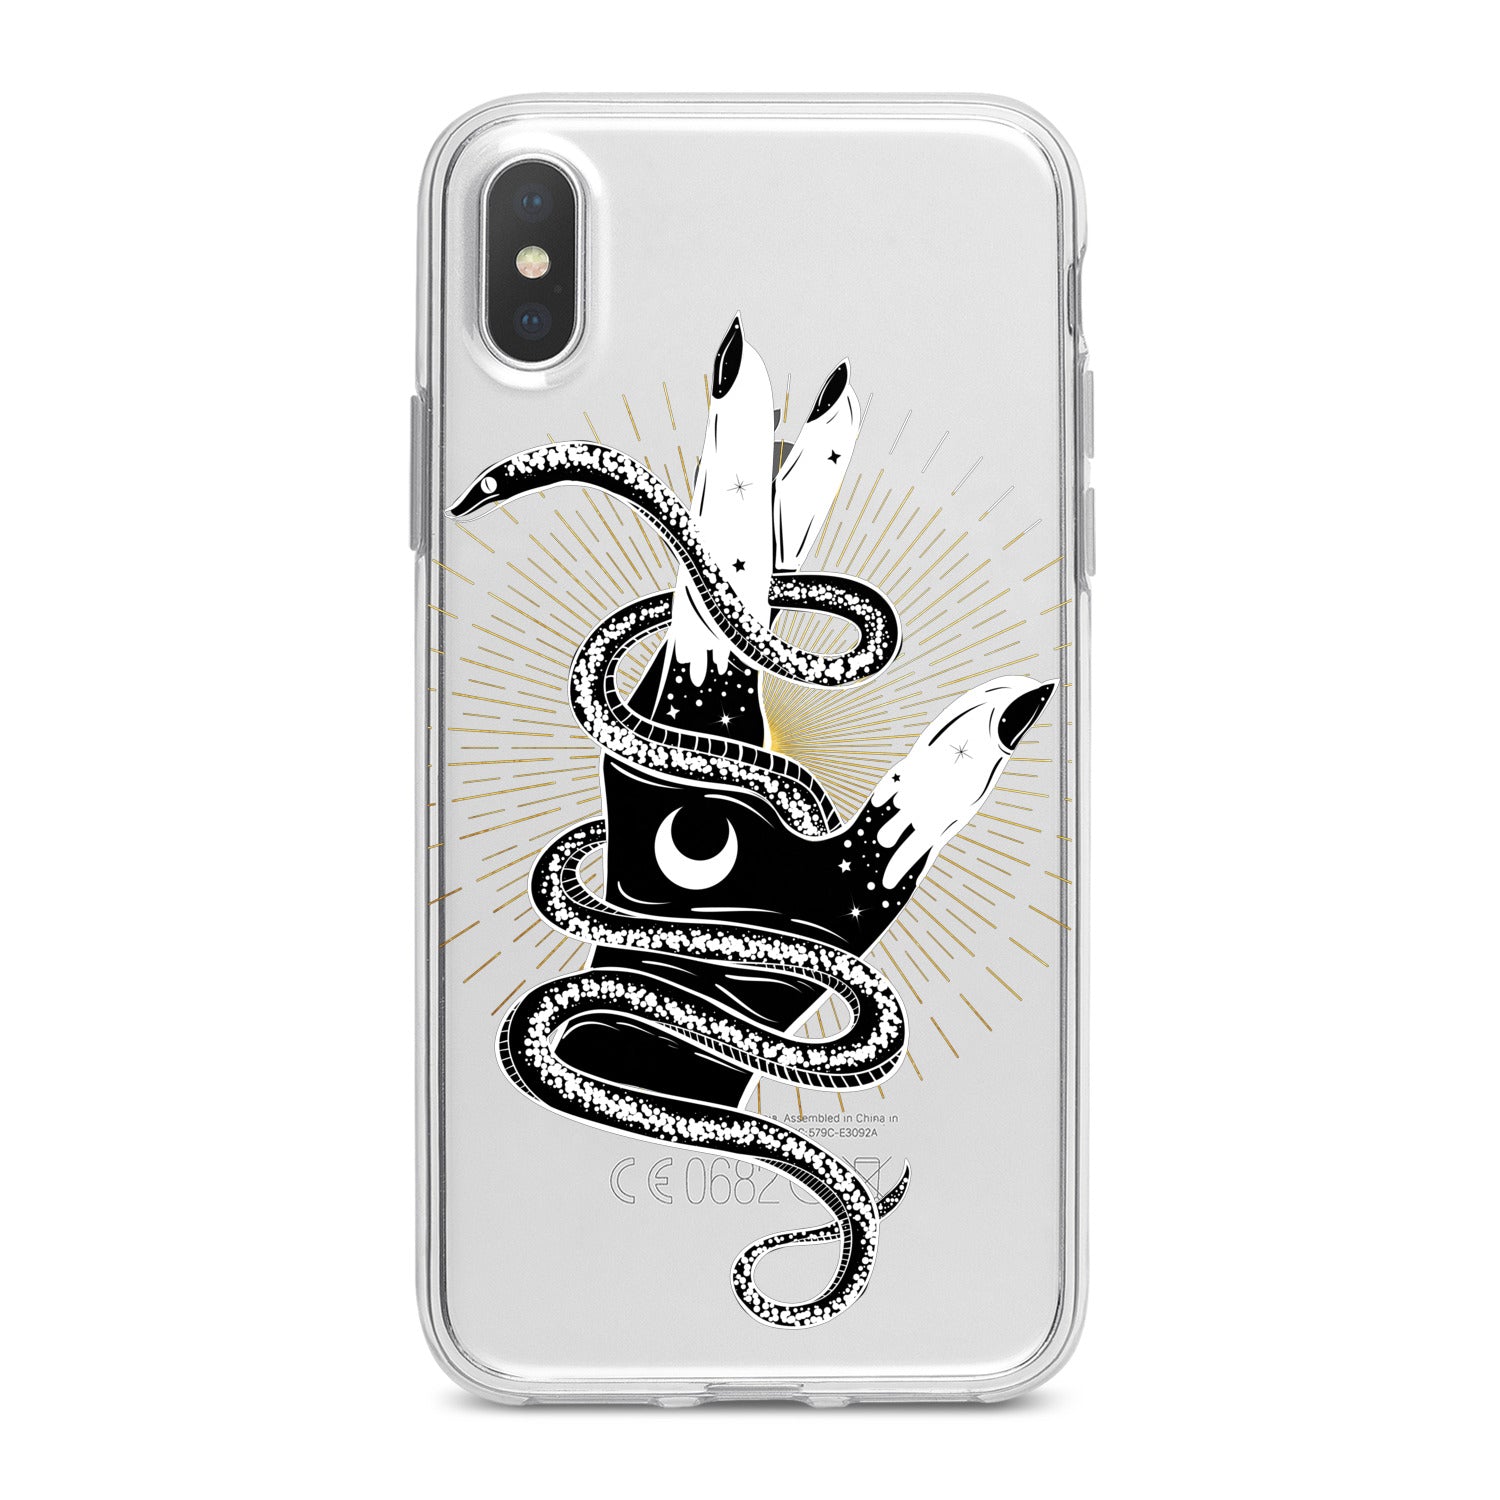 Lex Altern Bohemian Snake Phone Case for your iPhone & Android phone.